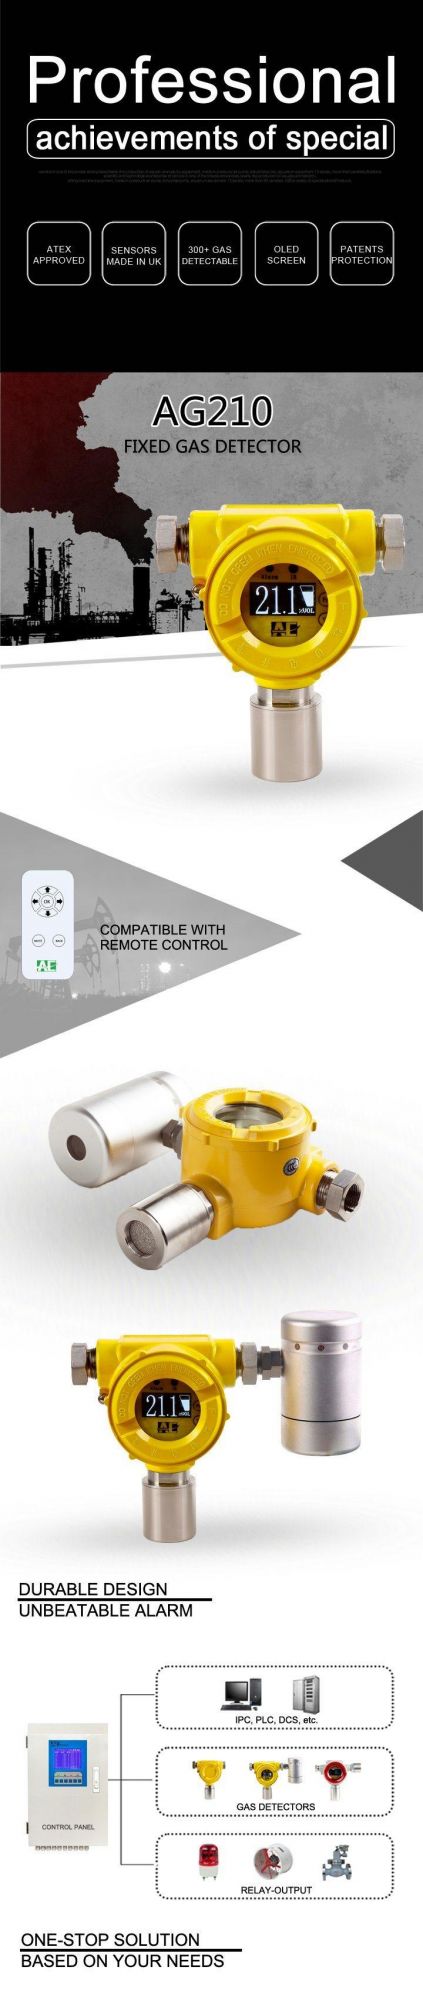 Sil2 Certified Fixed Gas Leakage Sensor with Remote Control Operation